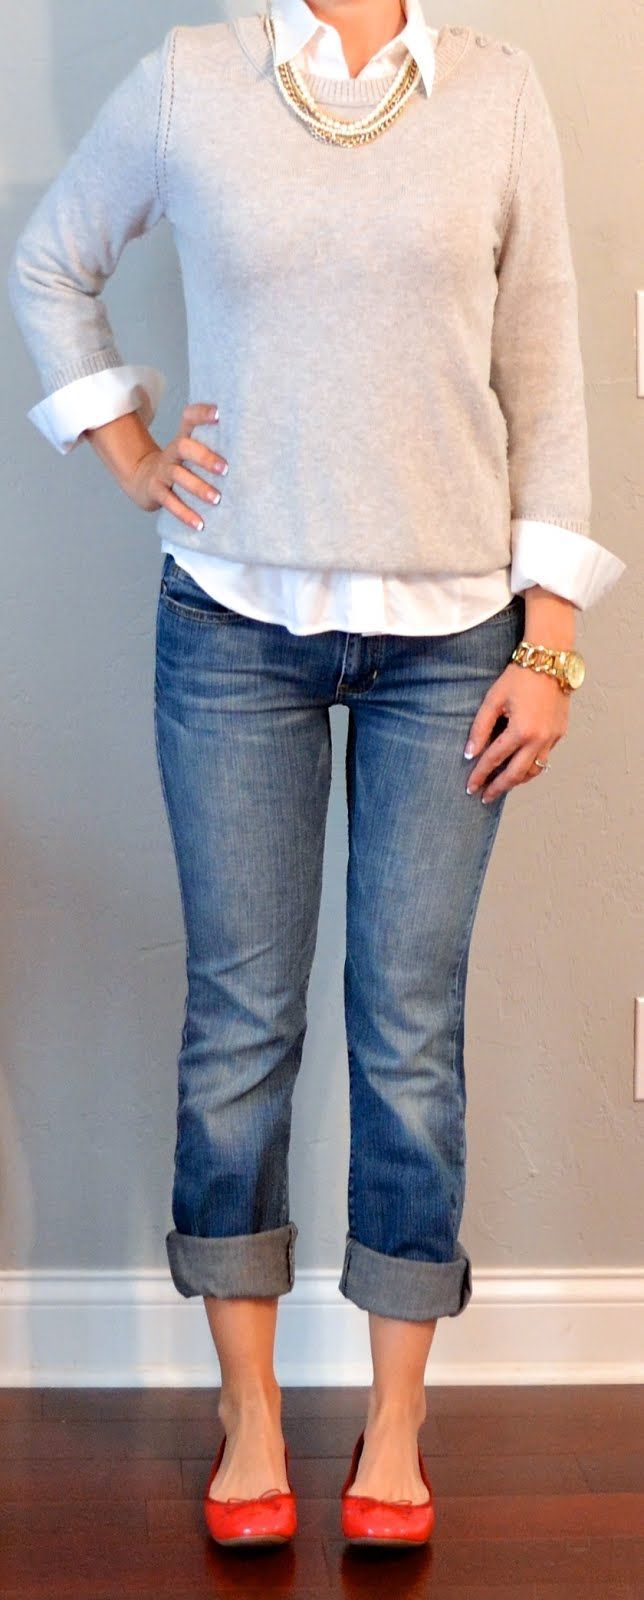 Outfit Posts: outfit post: white button down shirt, grey sweater, boyfriend jean